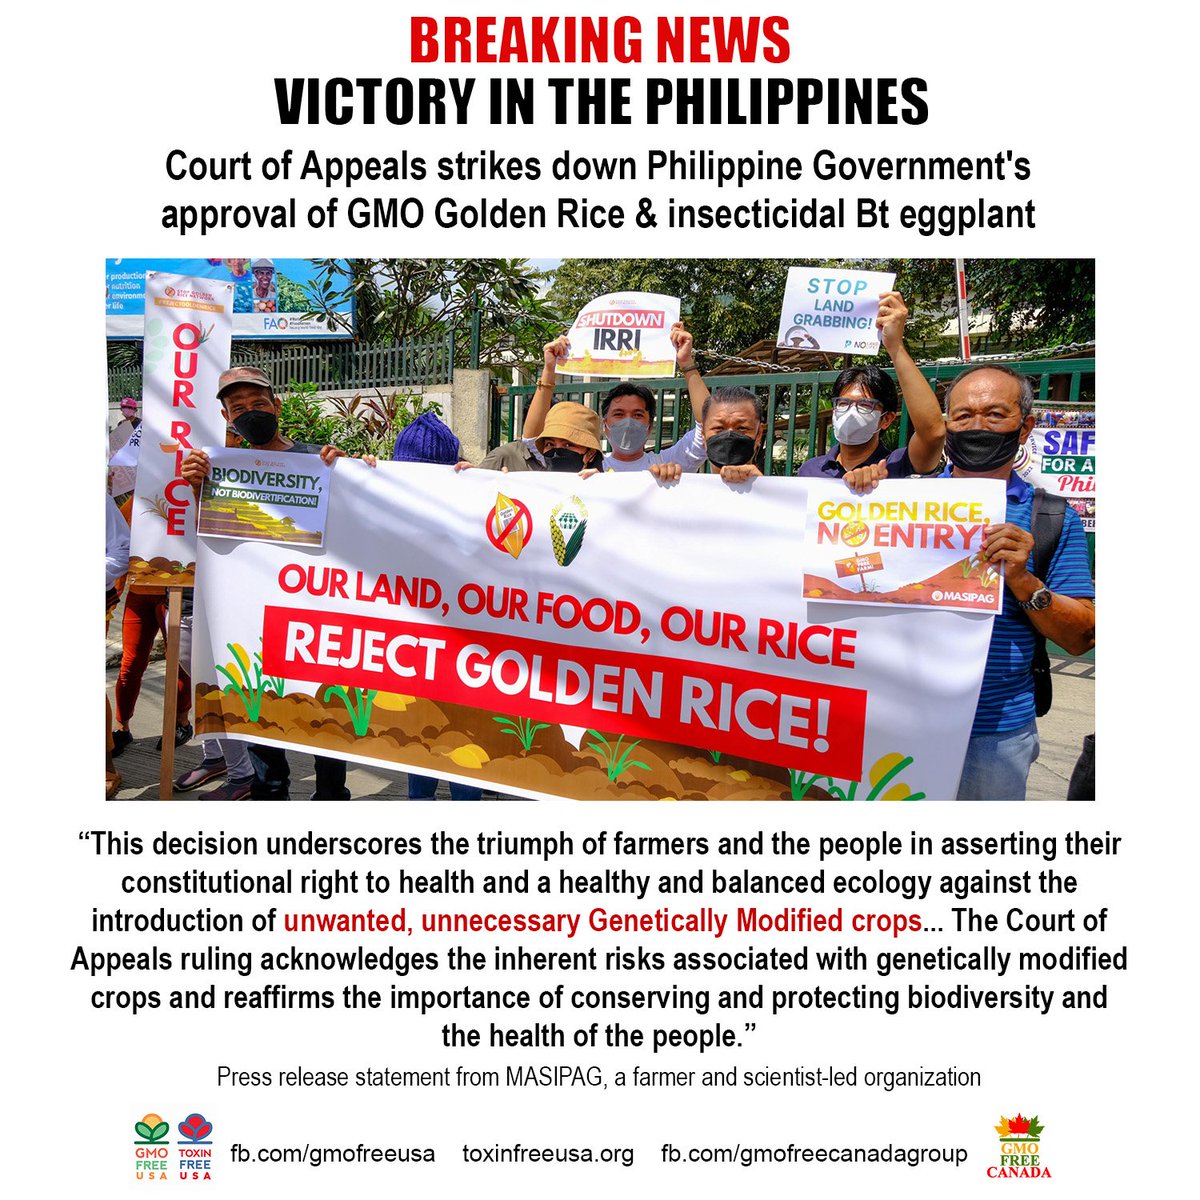 Philippines' Court of Appeals separated fact from fiction acknowledging the inherent risks associated with #GMO crops and 'reaffirms the importance of conserving and protecting biodiversity and health of the people.'